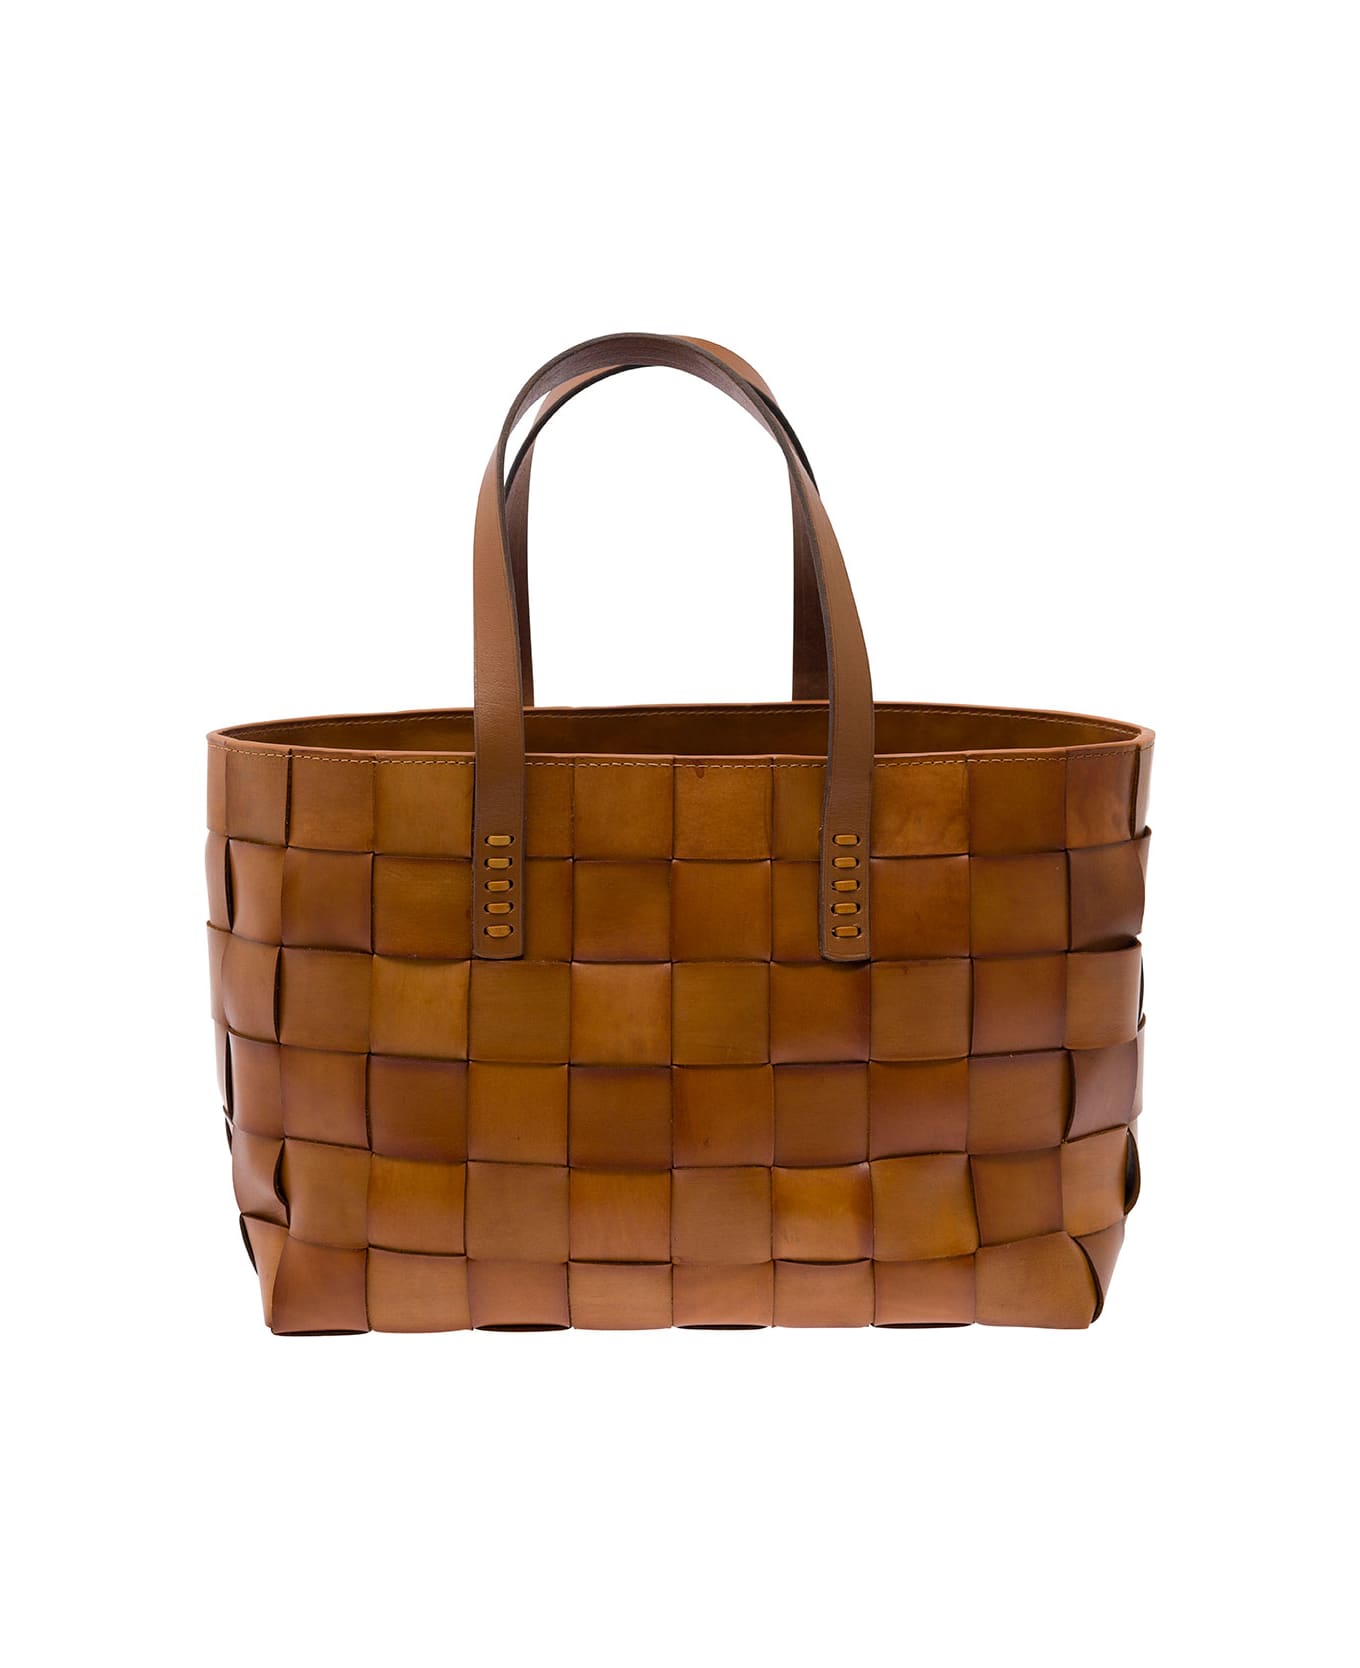 Dragon Diffusion Brown Tote Bag With Double Handle In Woven Leather - Beige